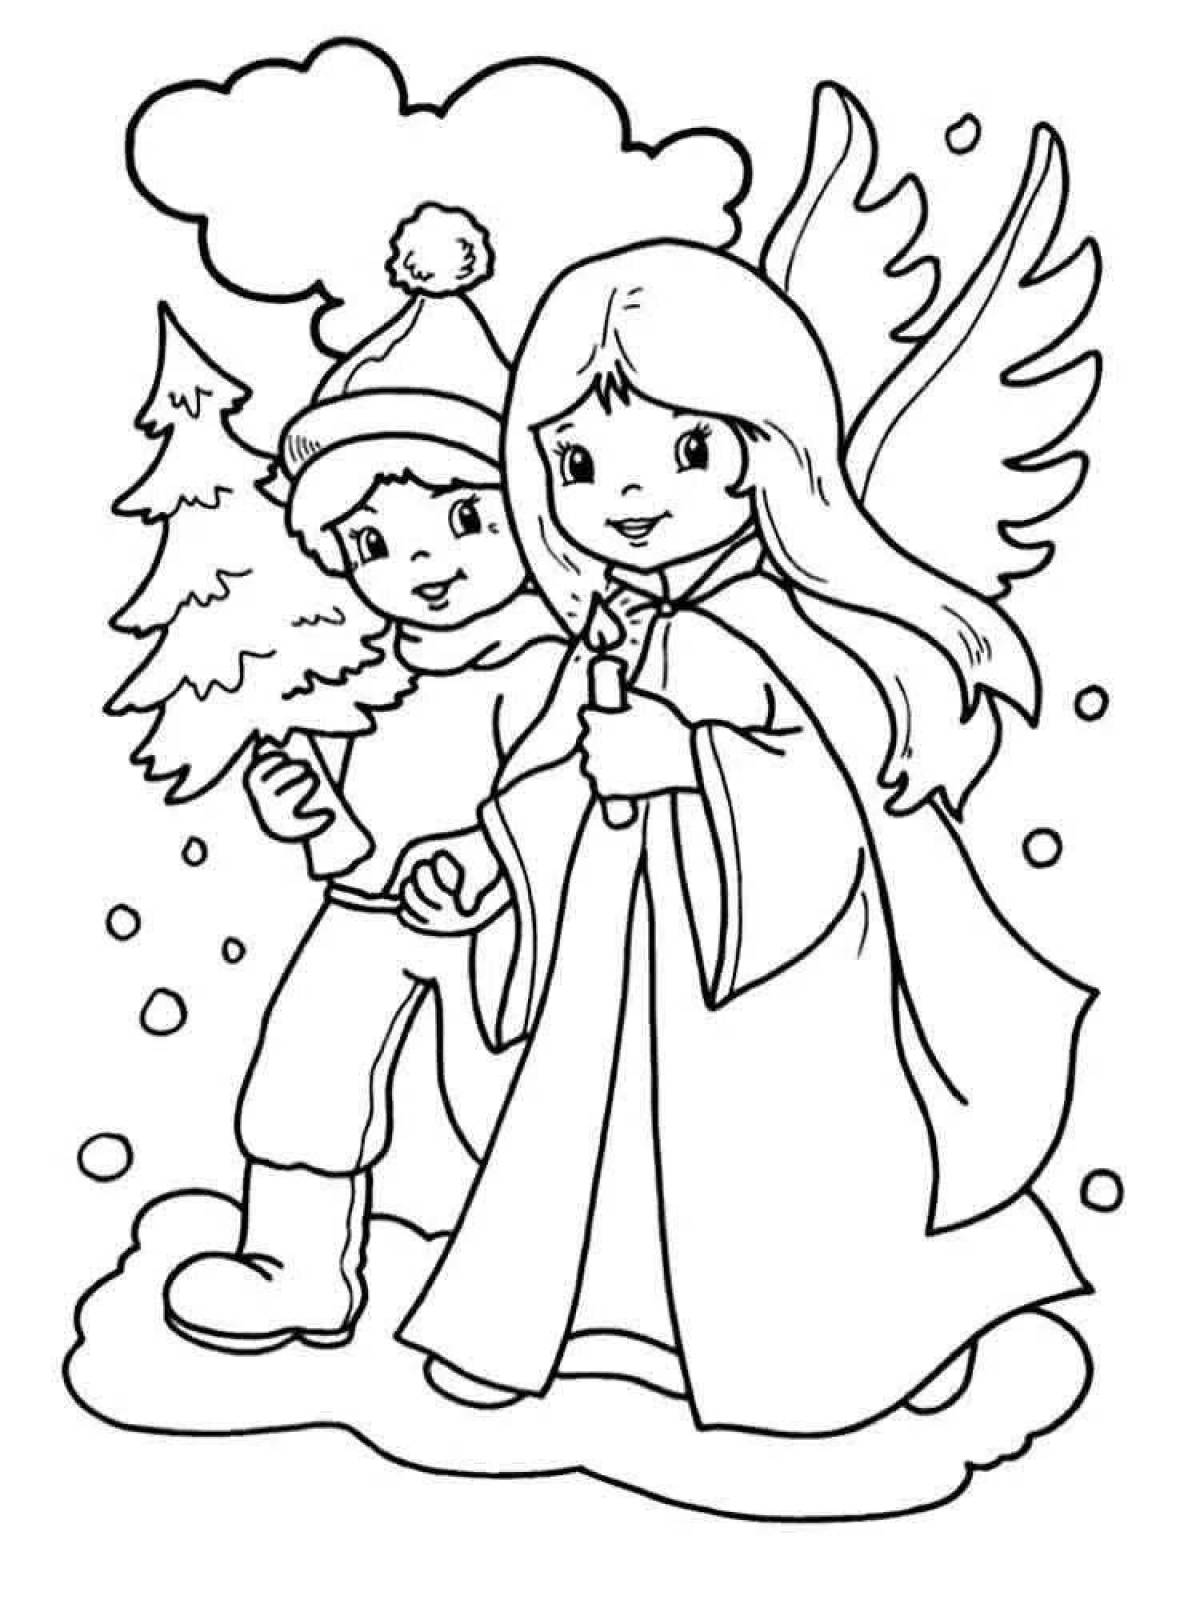 Luminous Christmas coloring book for children 6-7 years old